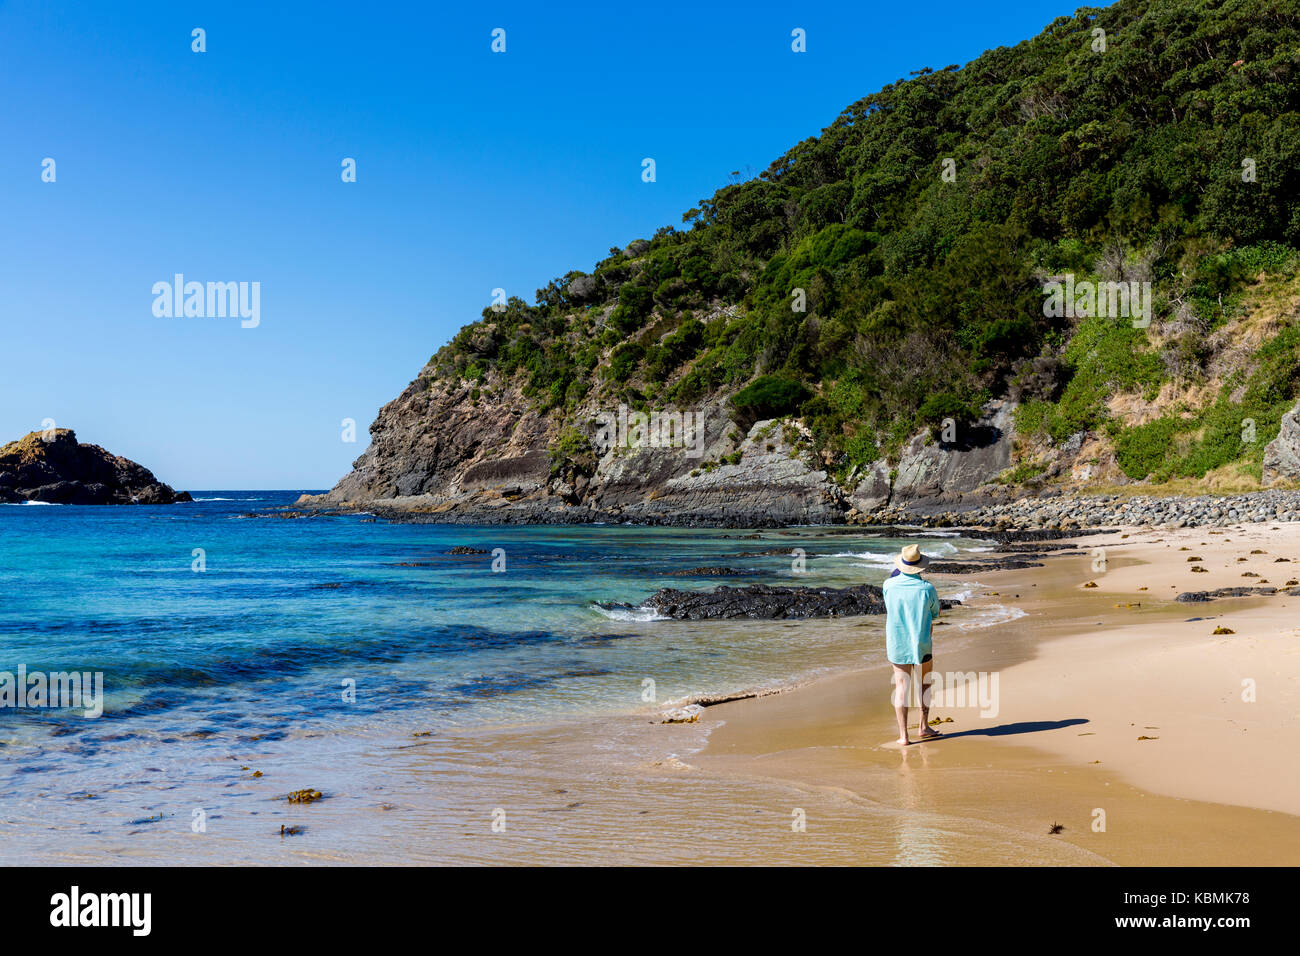 Man carrying a baby walking along Boat Beach at Seal Rocks on the mid north coast of New South Wales,Australia Stock Photo